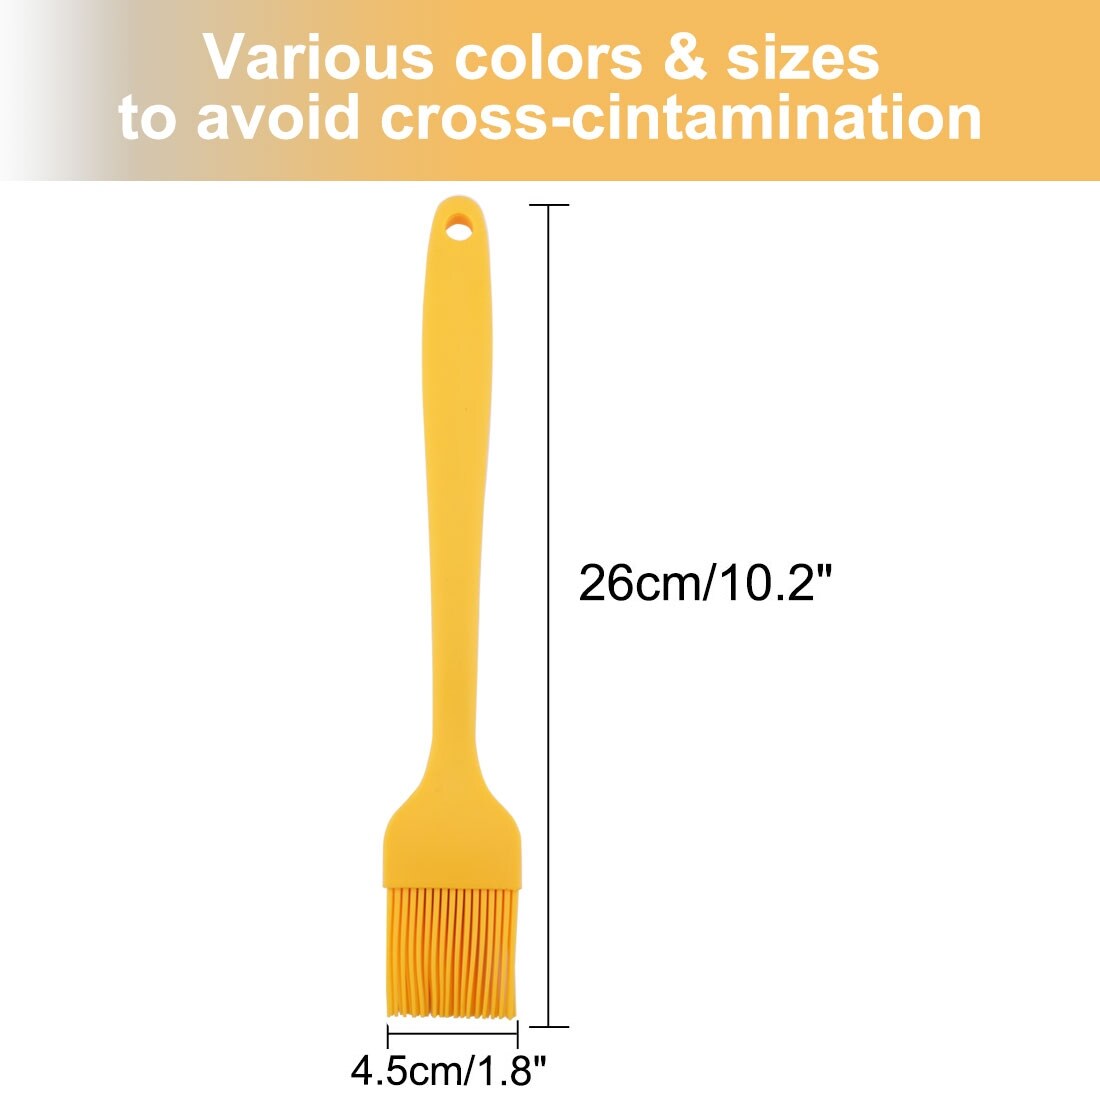 https://ak1.ostkcdn.com/images/products/is/images/direct/9cd4abfad9263183655915ef0c2a5d9280d90ebc/Silicone-Brush-Pastry-Oil-Basting-Heat-Resistant-Cooking-Essential-Cookware-for-Kitchen-Barbecue-Pastries-Cakes-Desserts-Yellow.jpg